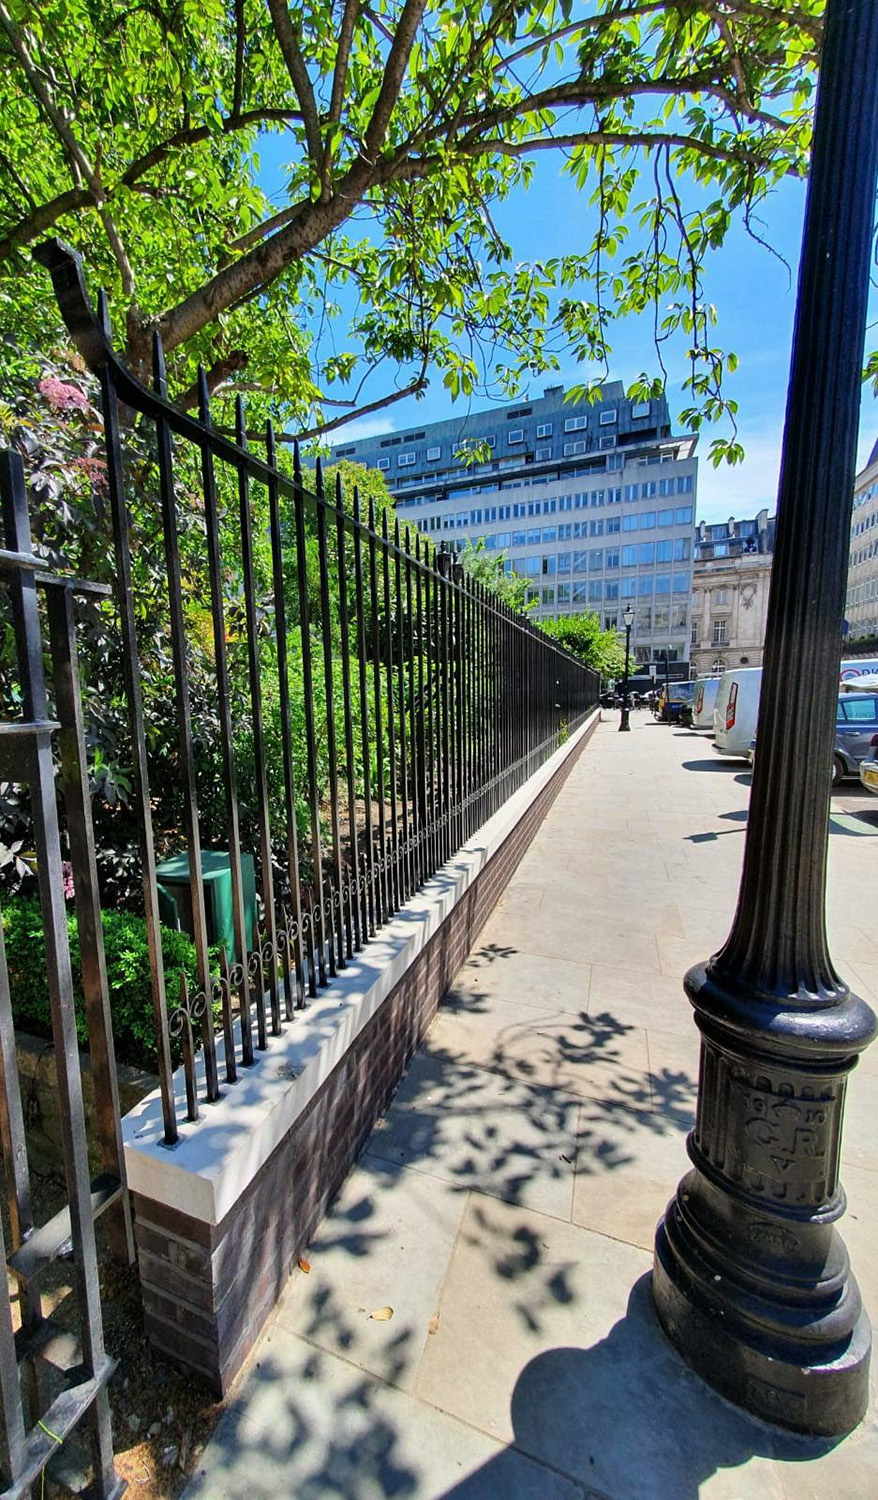 Metalcraft chosen for the restoration of historic railings at St James’s Square